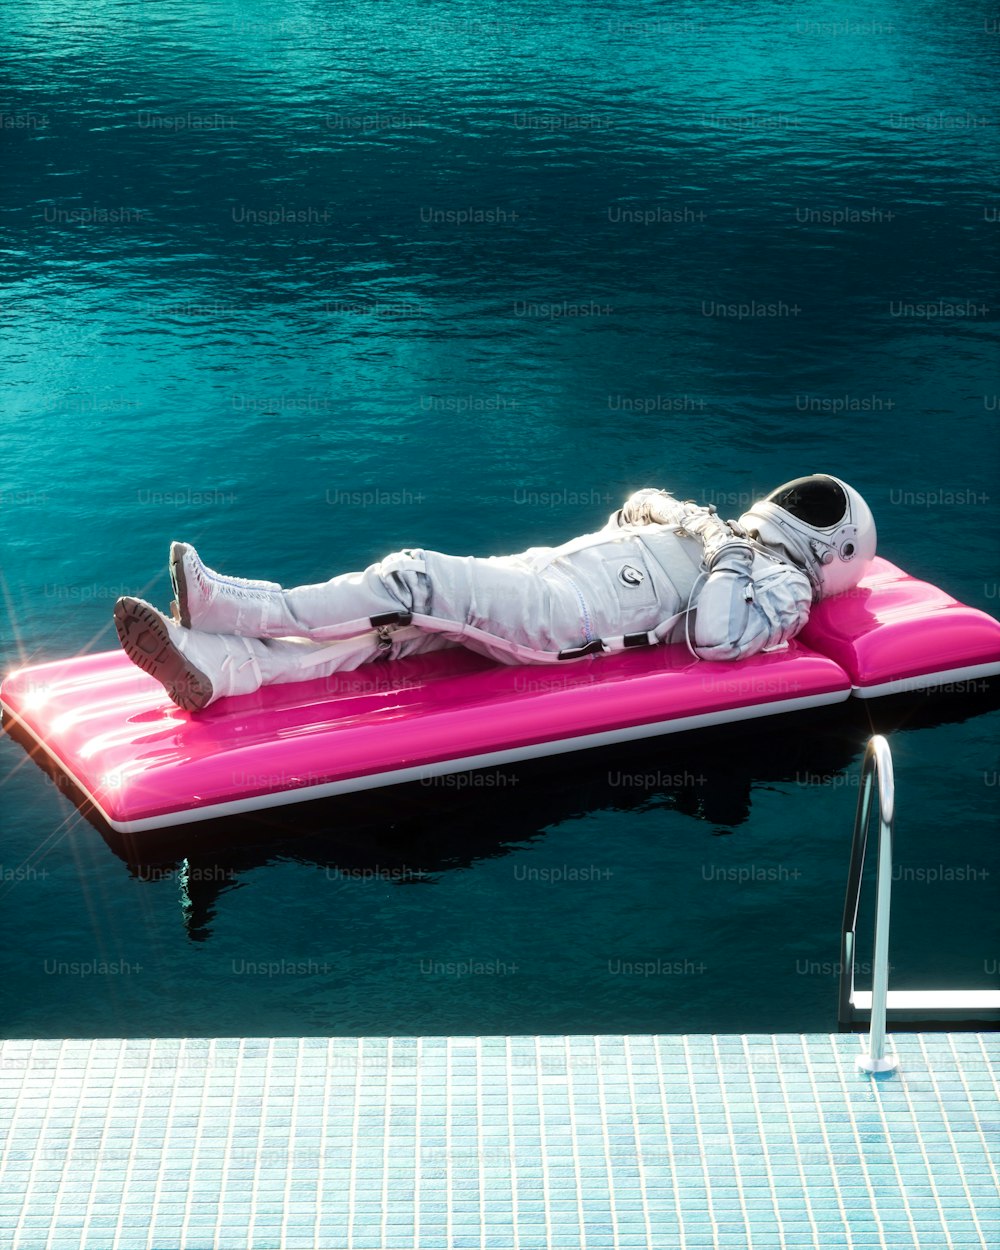 a man laying on top of a pink floater in the water